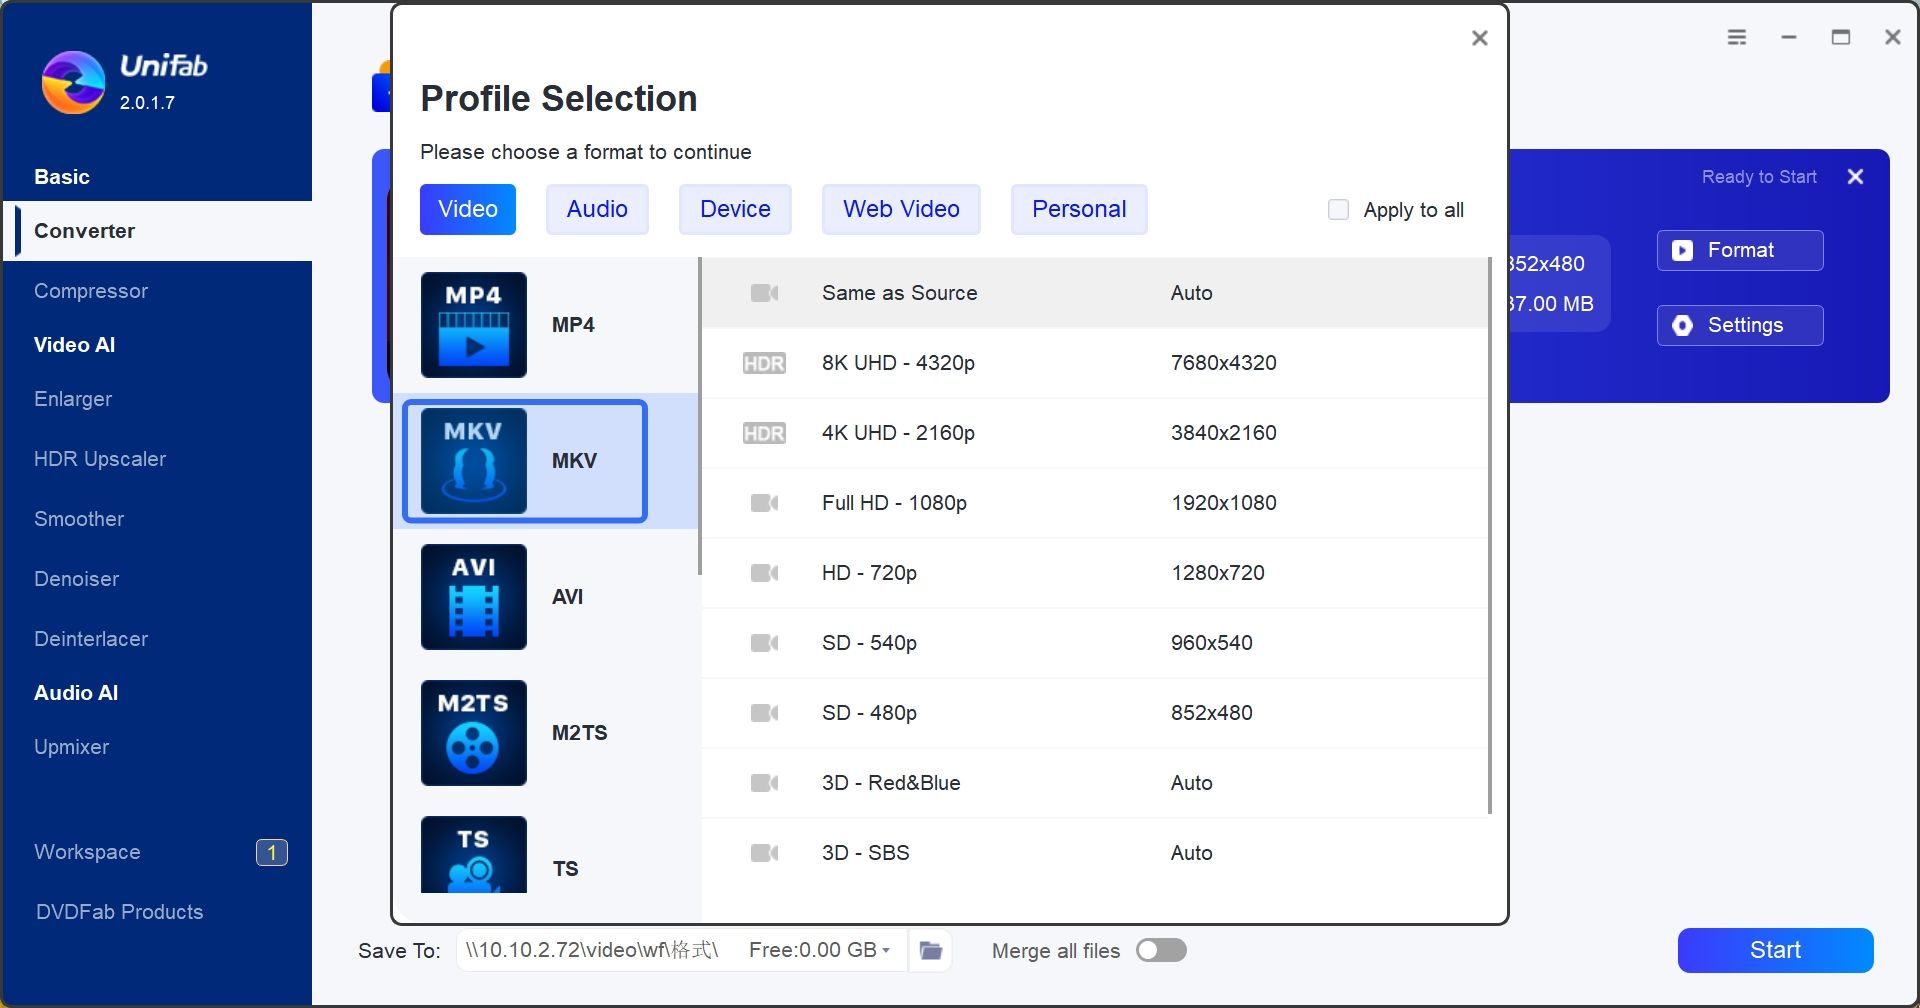  Add and Customize Video Settings unifab